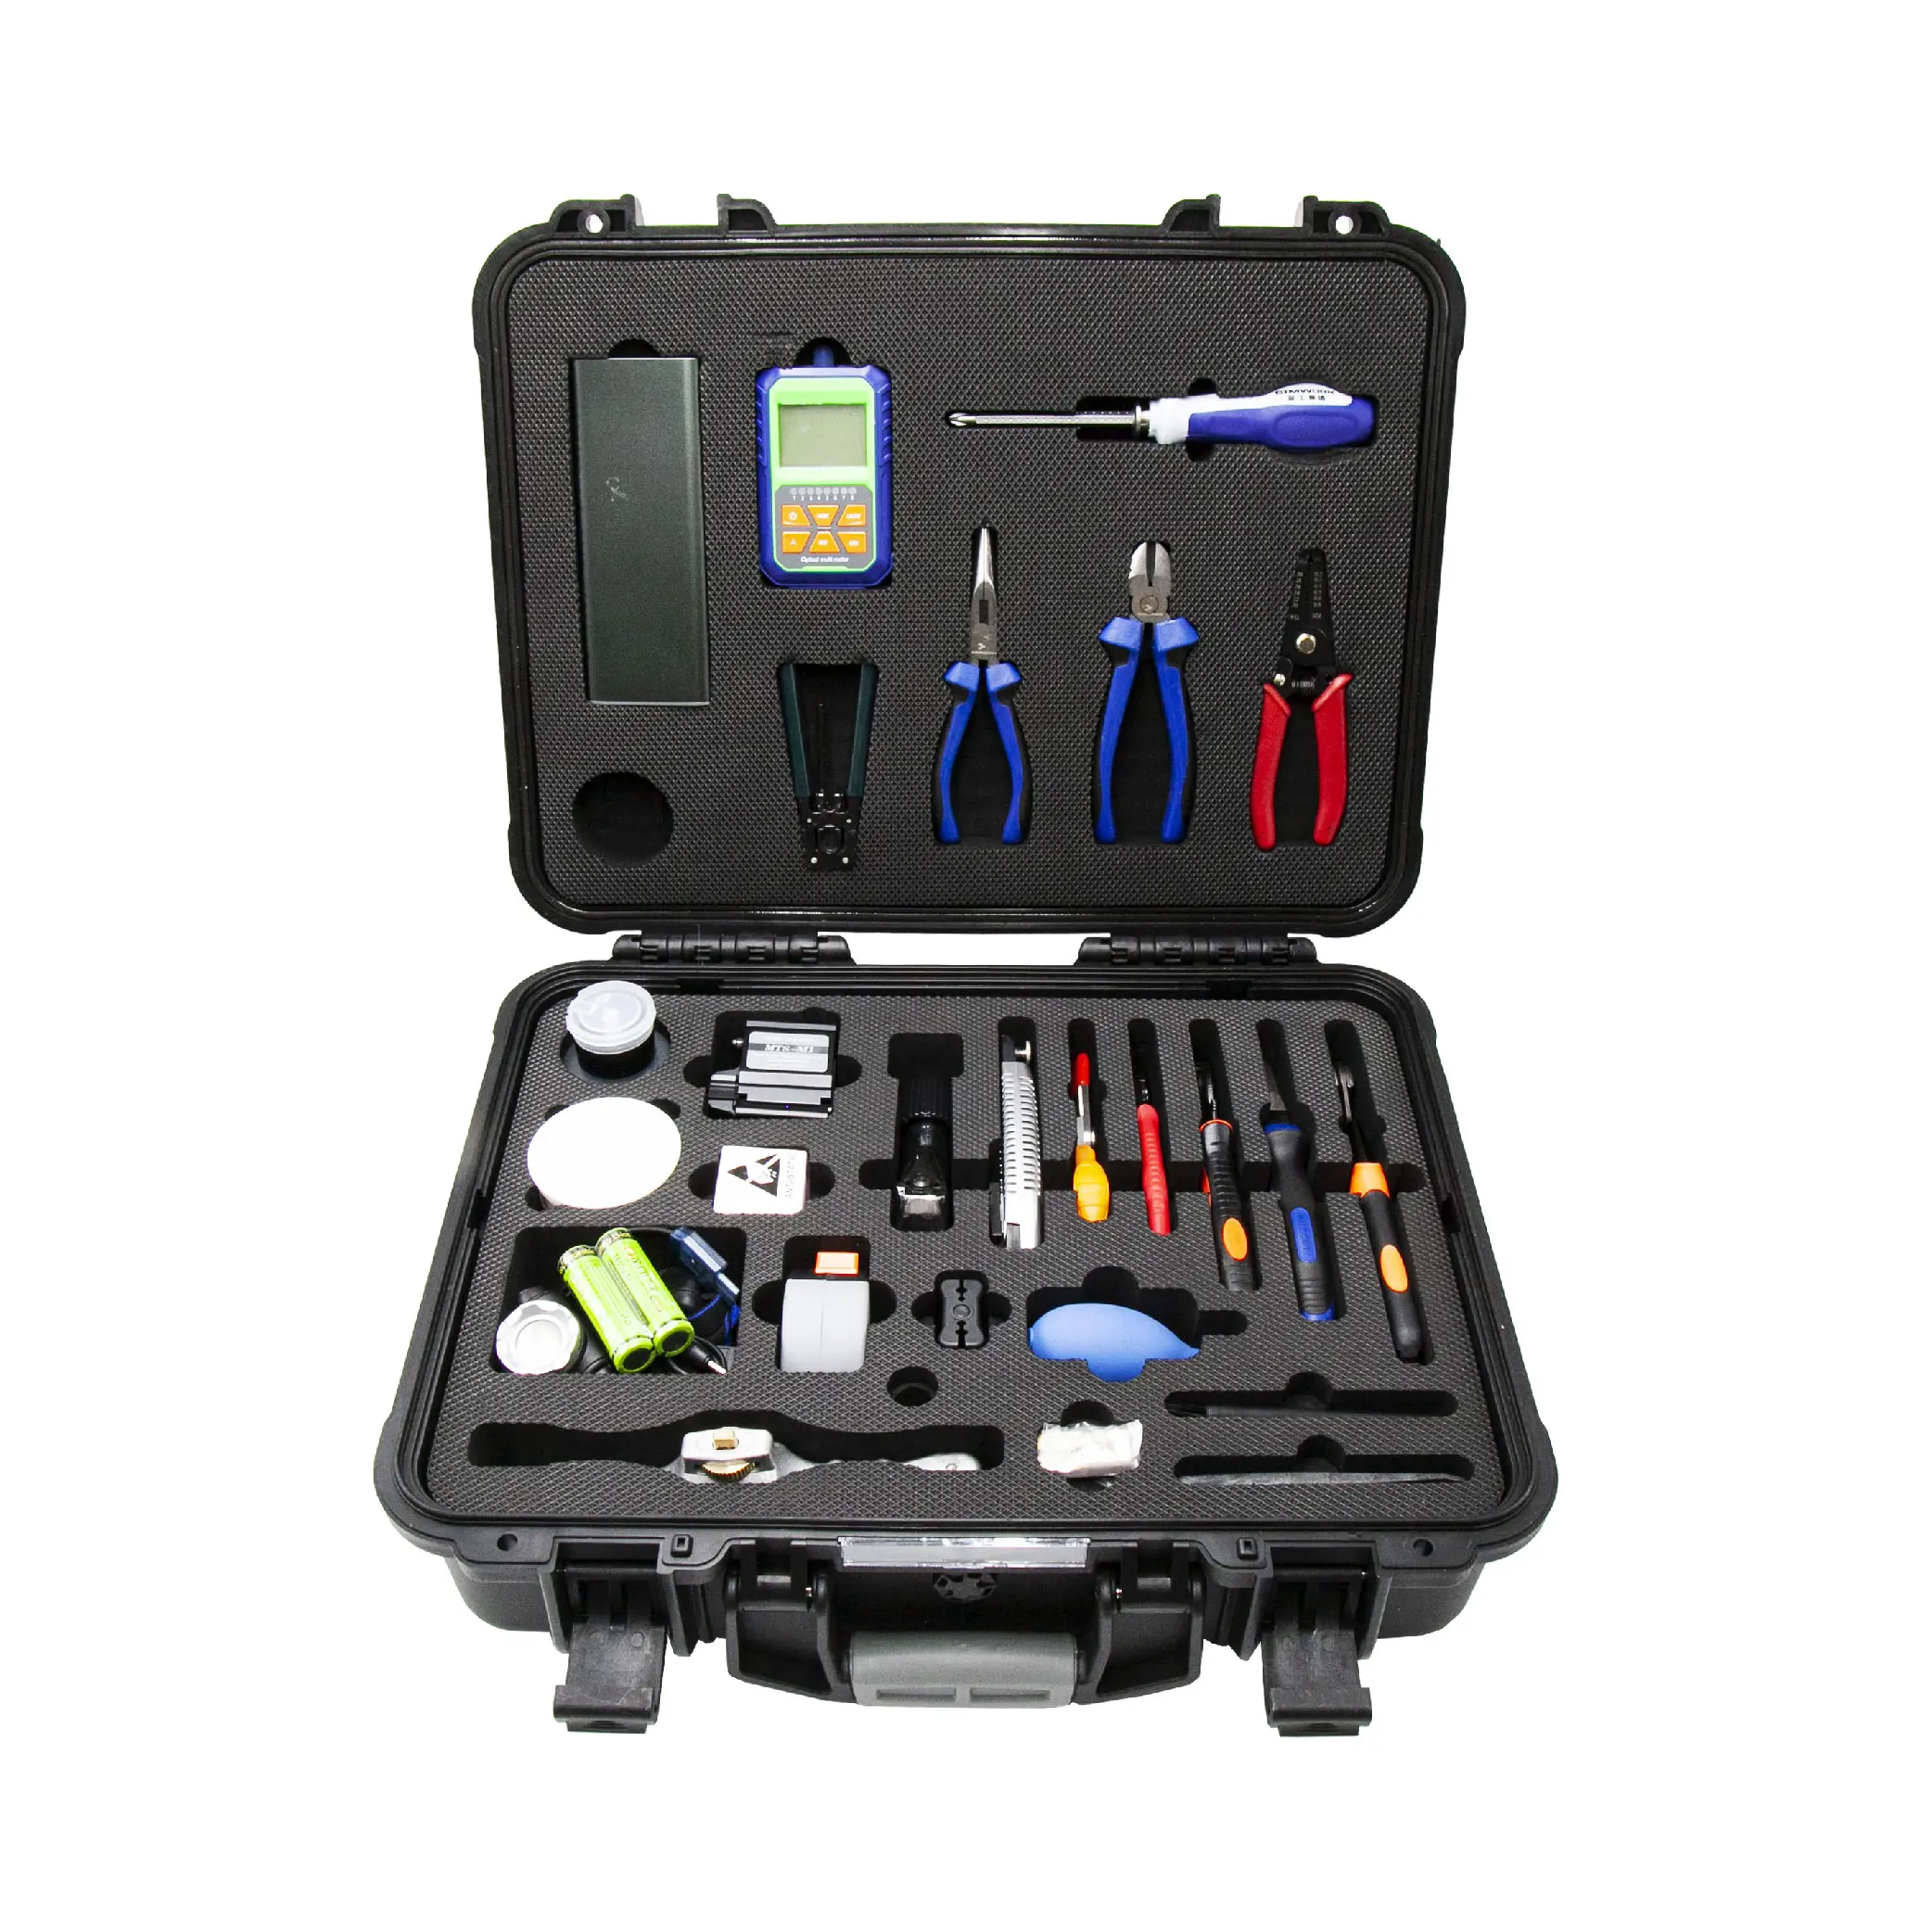 

28 Piece Network Tool Kit Complete tool Box Set for Cable Line Installation with Crimper Pliers hand tools